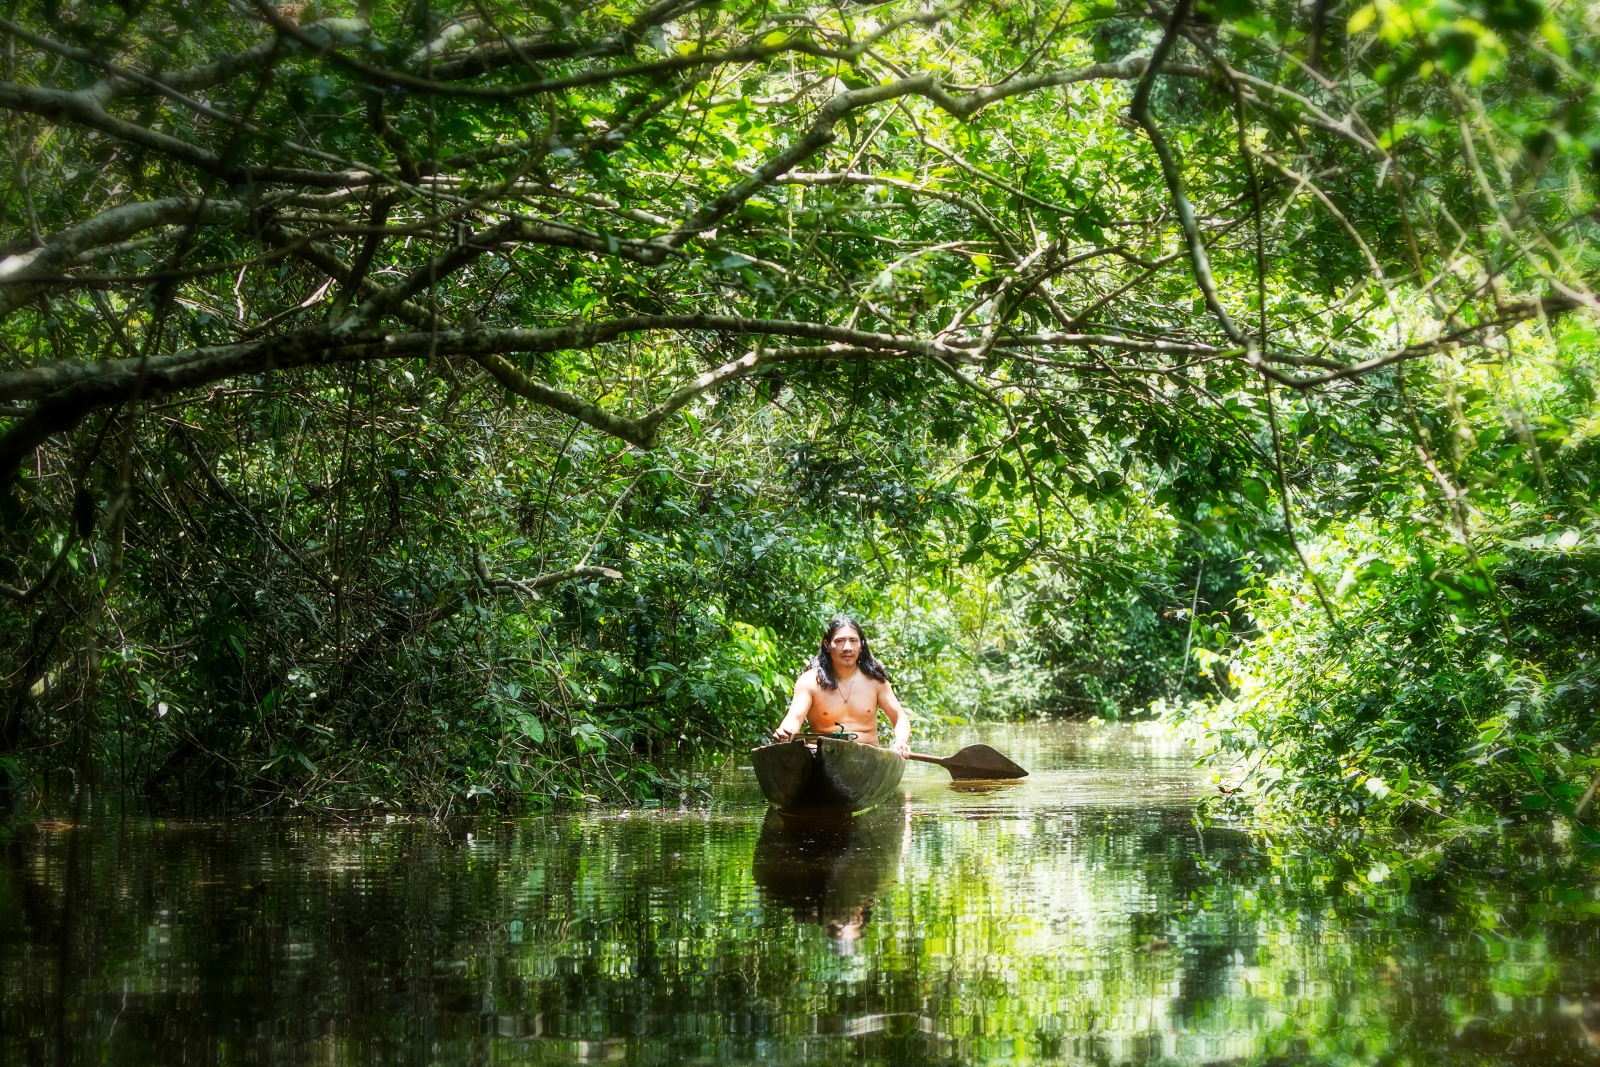 An indigenous old man canoeing, Brazil